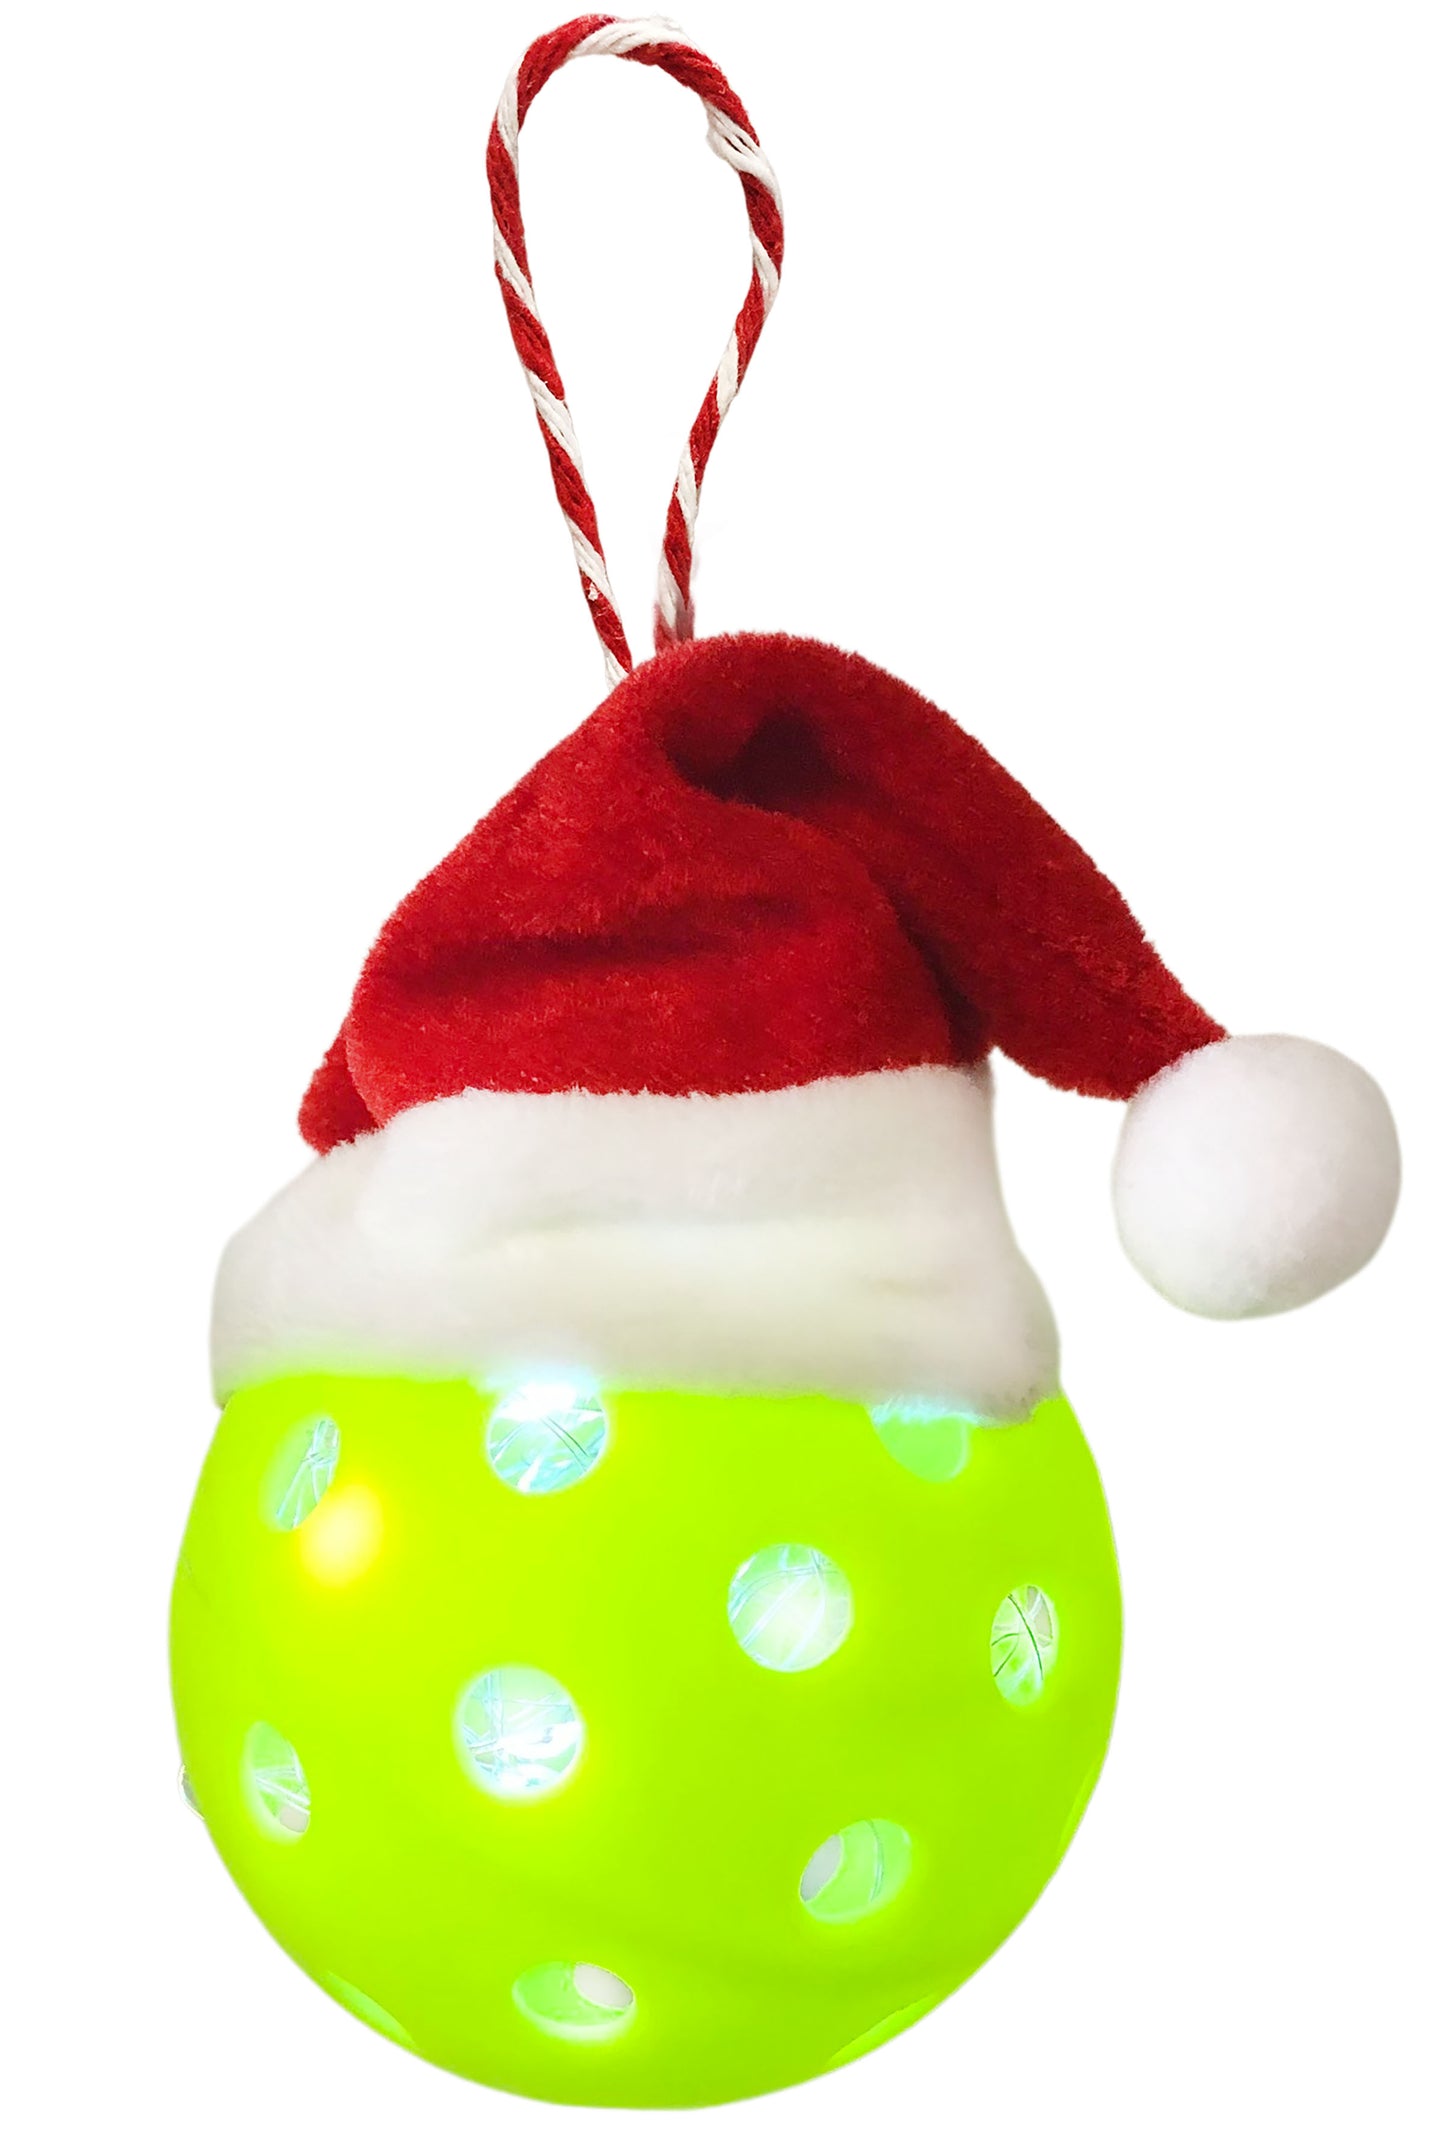 NEW Pickleball Christmas Ornament! SOLD OUT